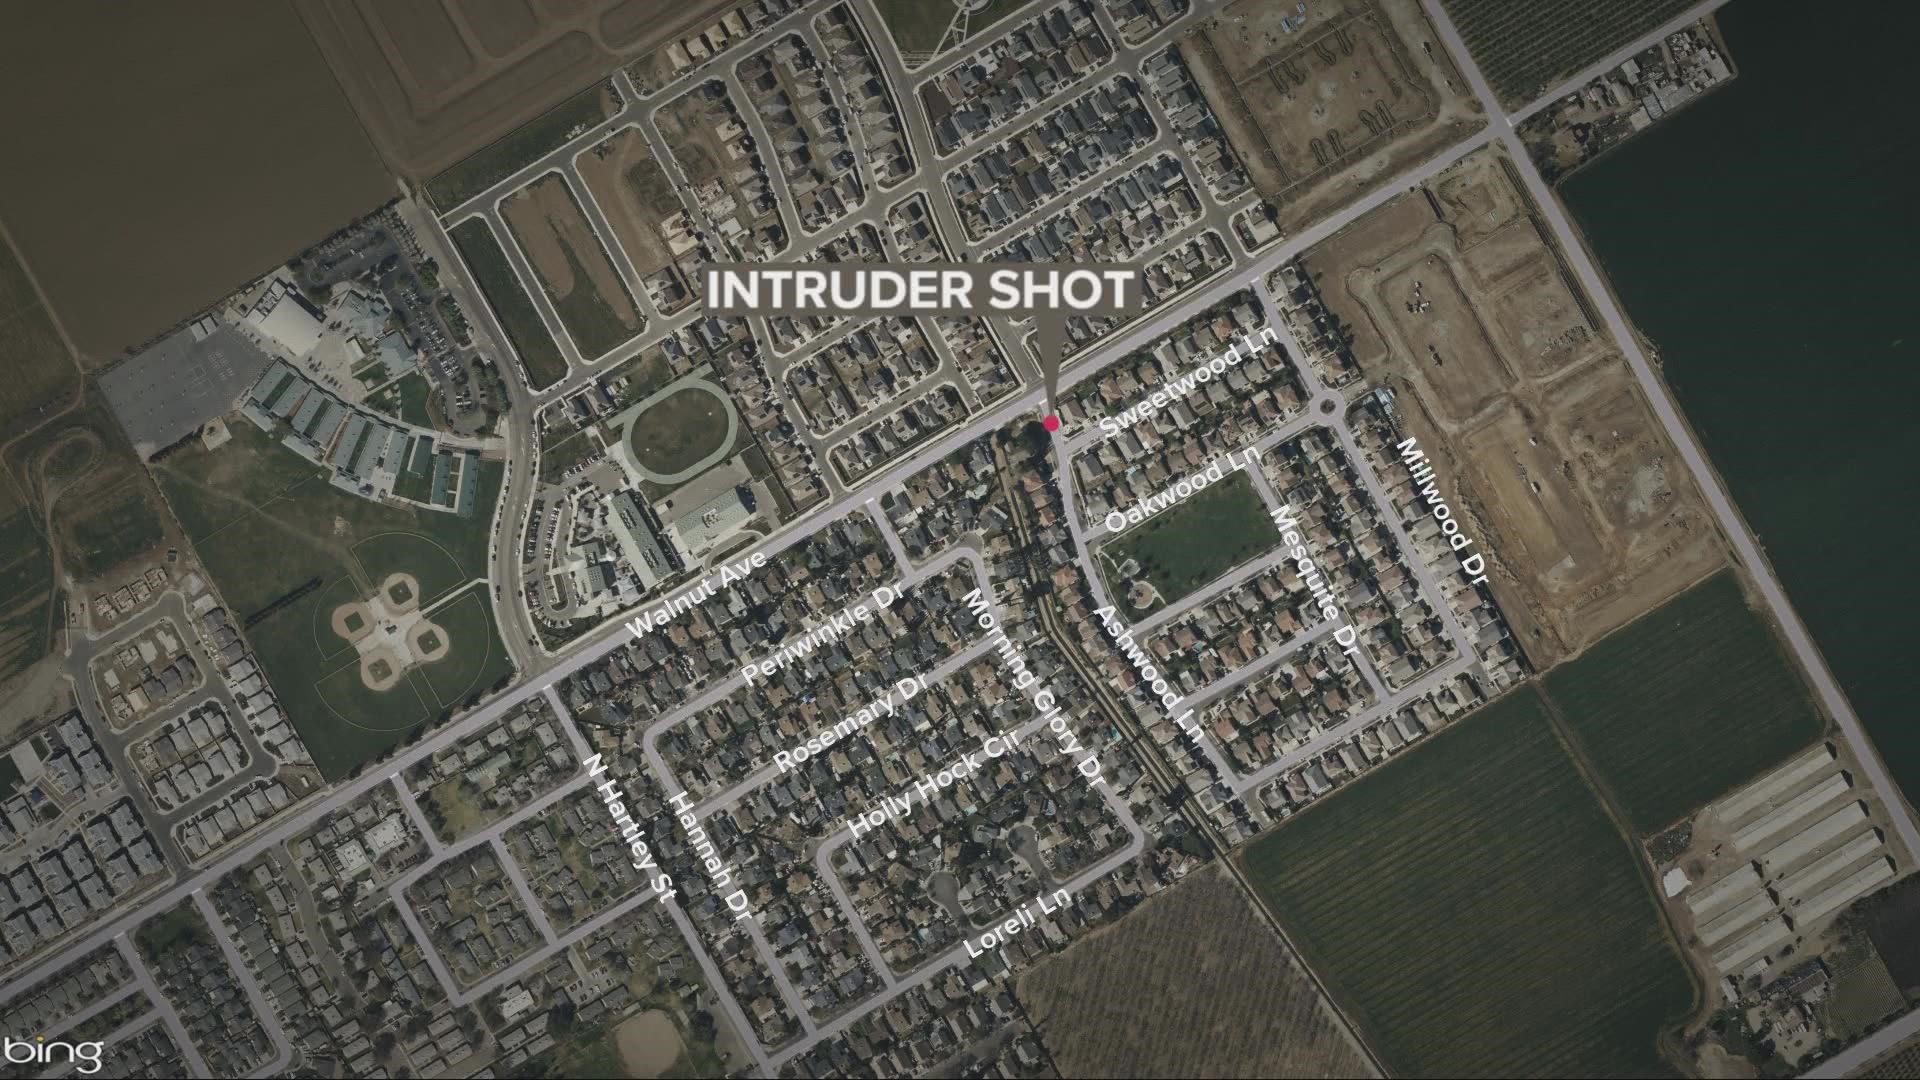 Authorities say the homeowner who fatally shot the alleged intoxicated intruder had purchased the gun the day before the self-defense shooting.